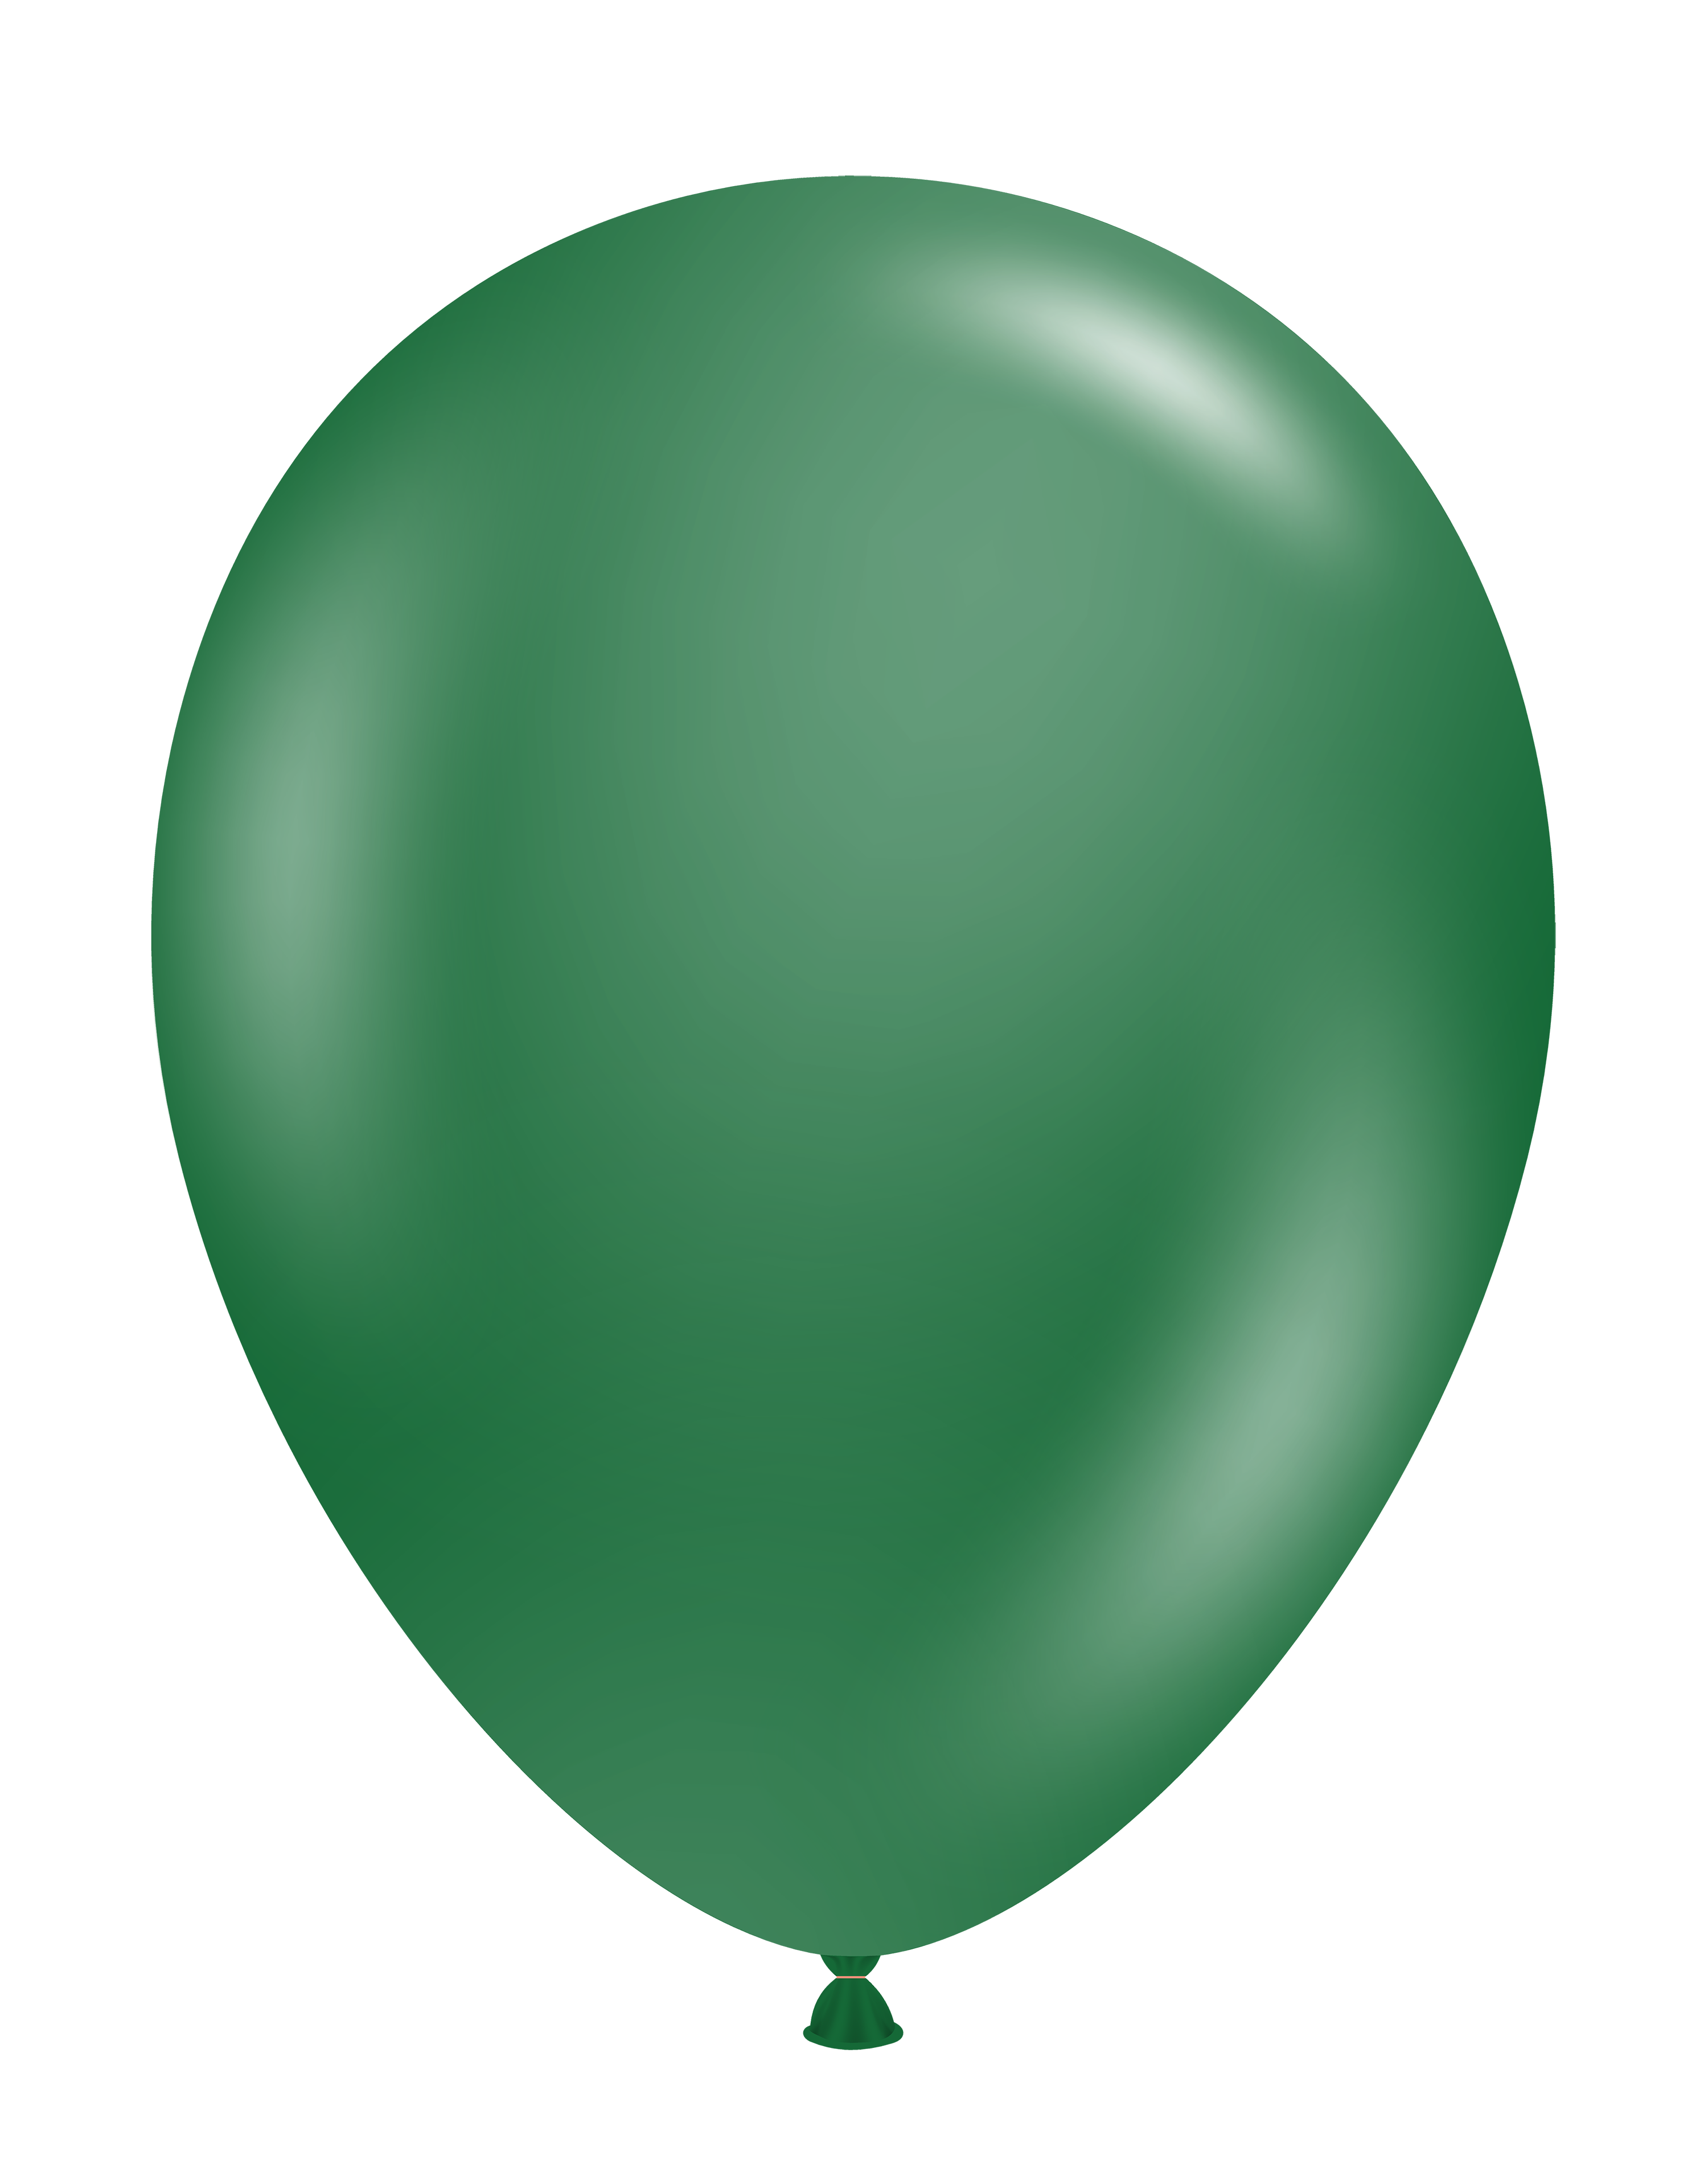 5" TUFTEX Metallic Pearlized Forest Green Latex Balloons | 50 Count